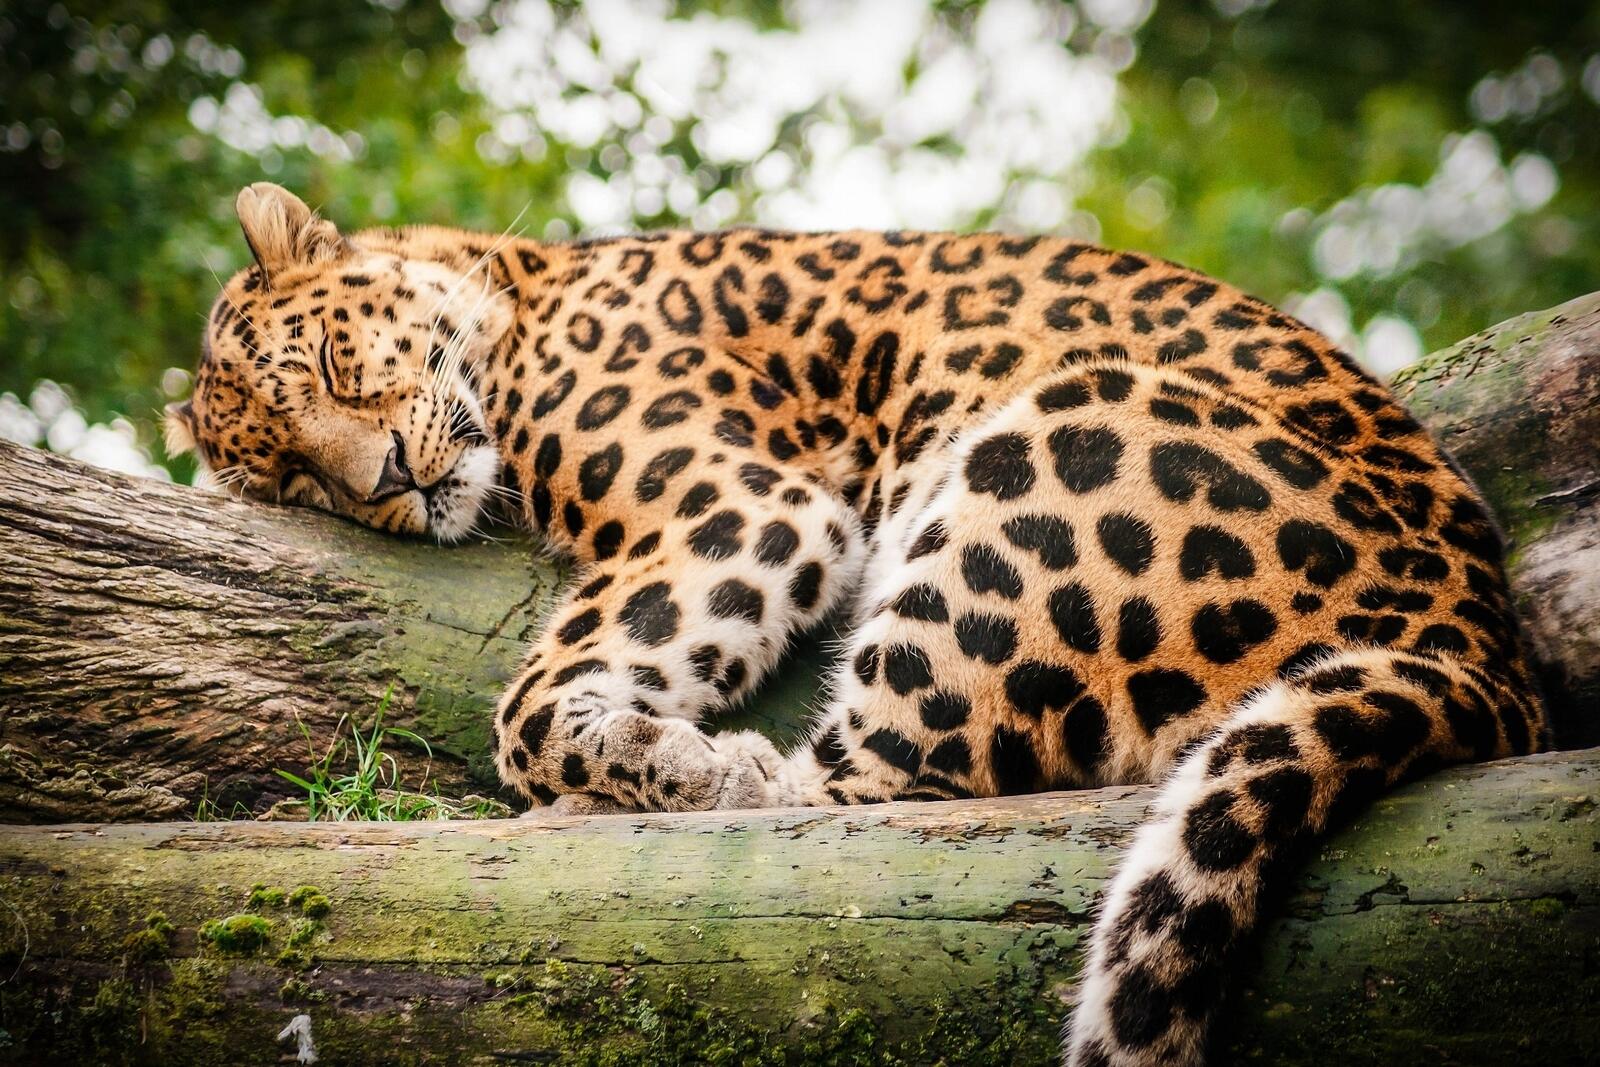 Free photo The leopard fell asleep after a successful hunt.